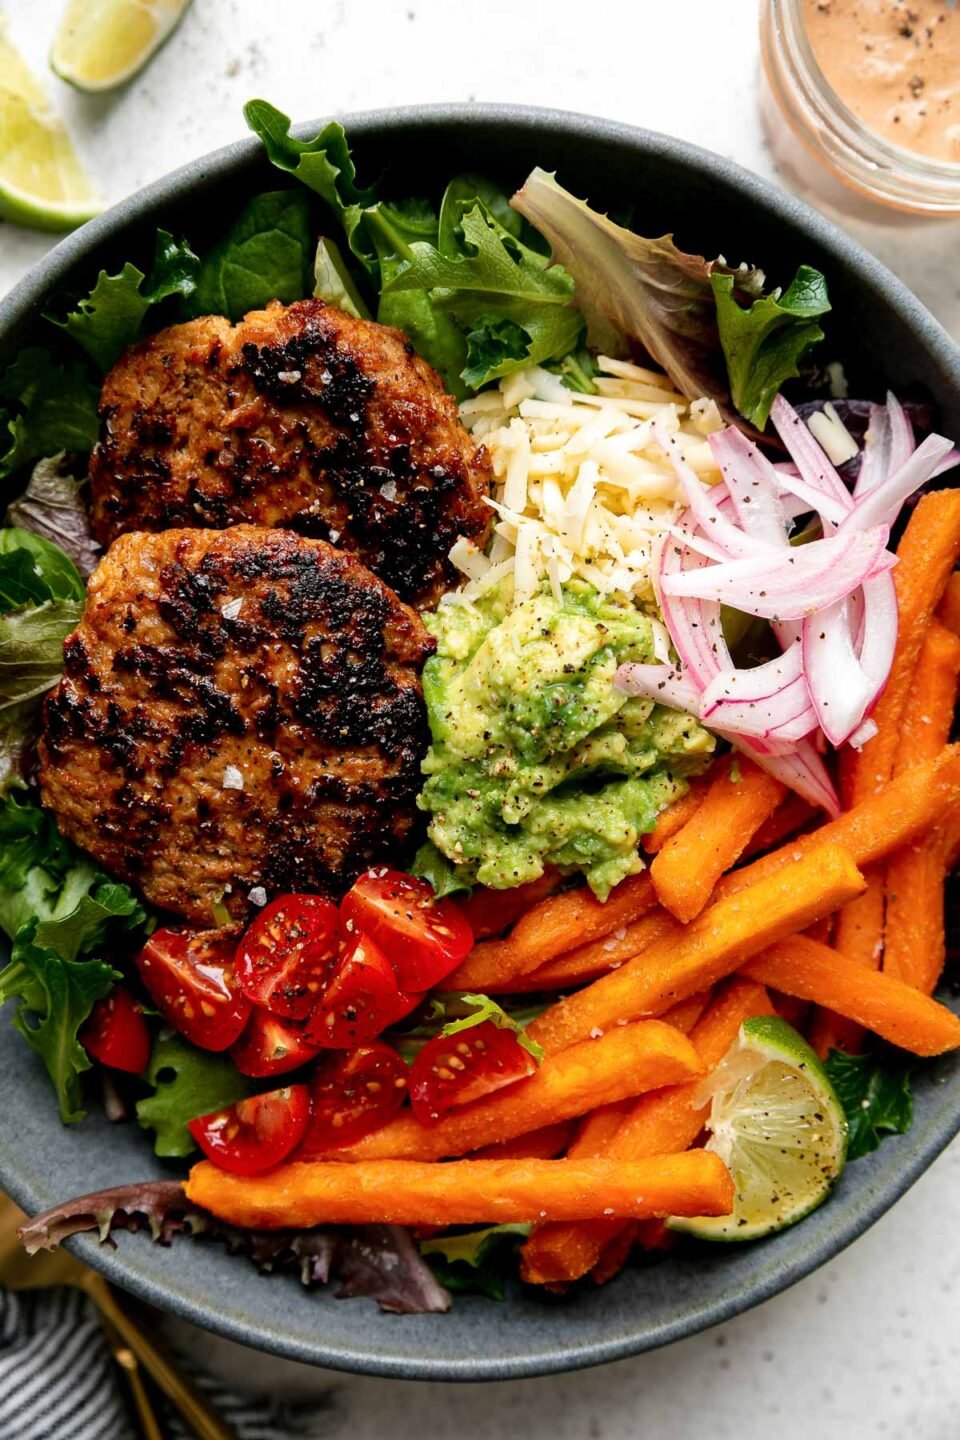 An assembled serving of Chipotle Turkey Burger Bowls with Sweet Potato Fries fills a blue ceramic bowl. The turkey burgers are nestled atop a bed of greens with baked Alexia Sweet Potato Fries, smashed avocado, pickled red onions, quartered cherry tomatoes, shredded cheese and a lime wedge. The bowl sits atop a creamy white textured surface with a small jar of chipotle lime crema, two lime wedges, a blue and white striped linen napkin and a set of gold silverware surrounding the bowl.